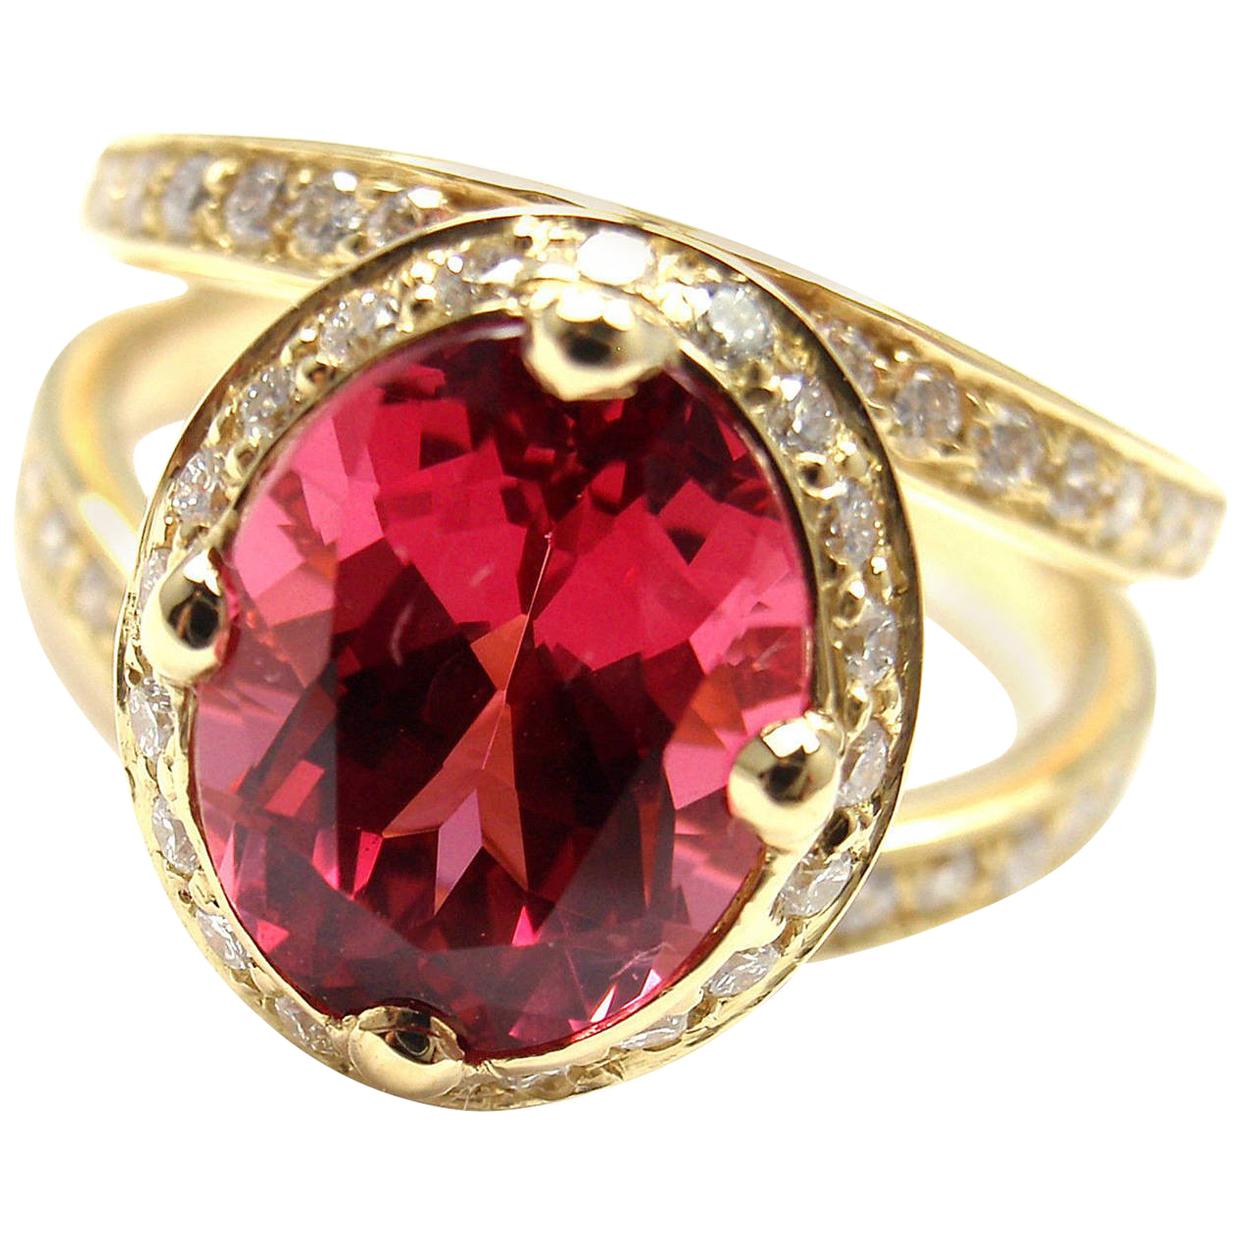 Temple St. Clair 2.89 Carat Red Spinel Diamond Gold Cocktail Ring